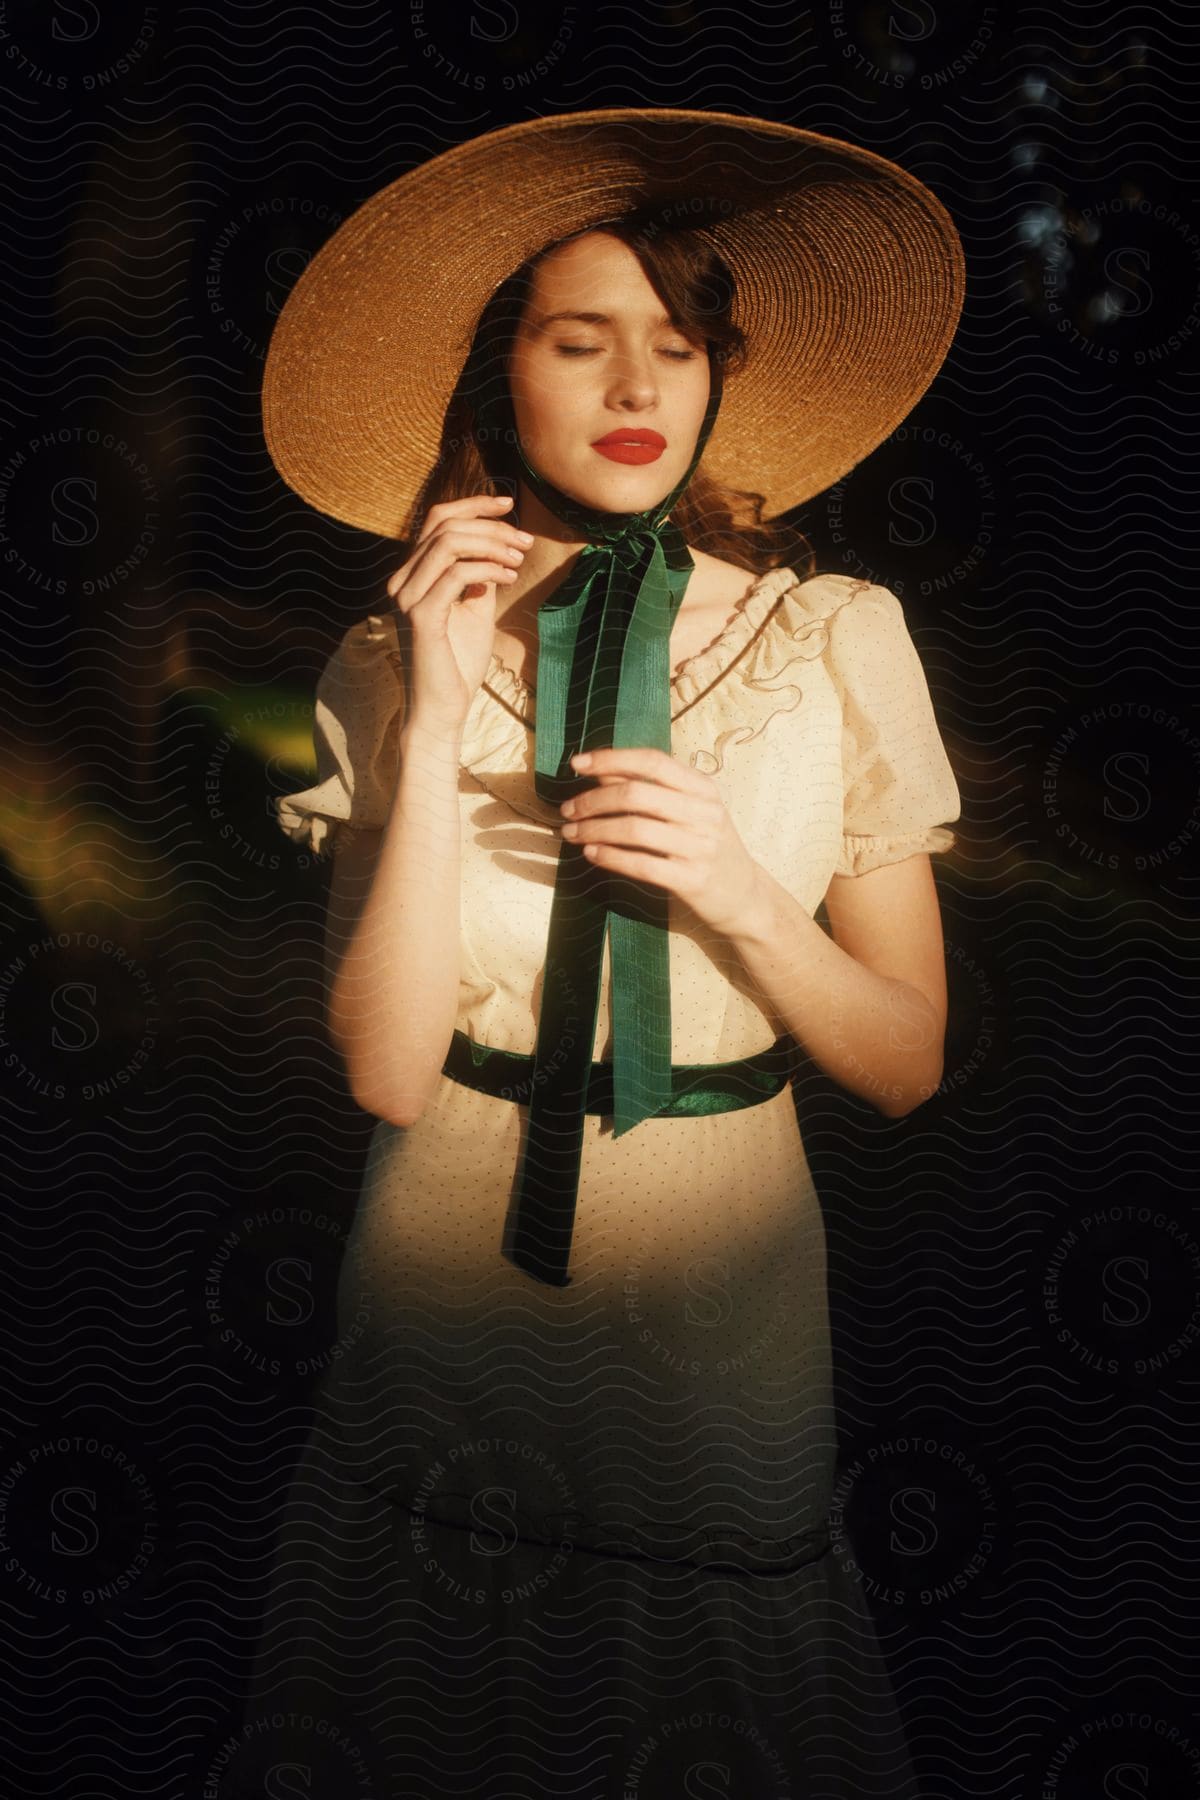 Woman with eyes closed wearing a white dress with a long sun hat and the sun's reflection on her face